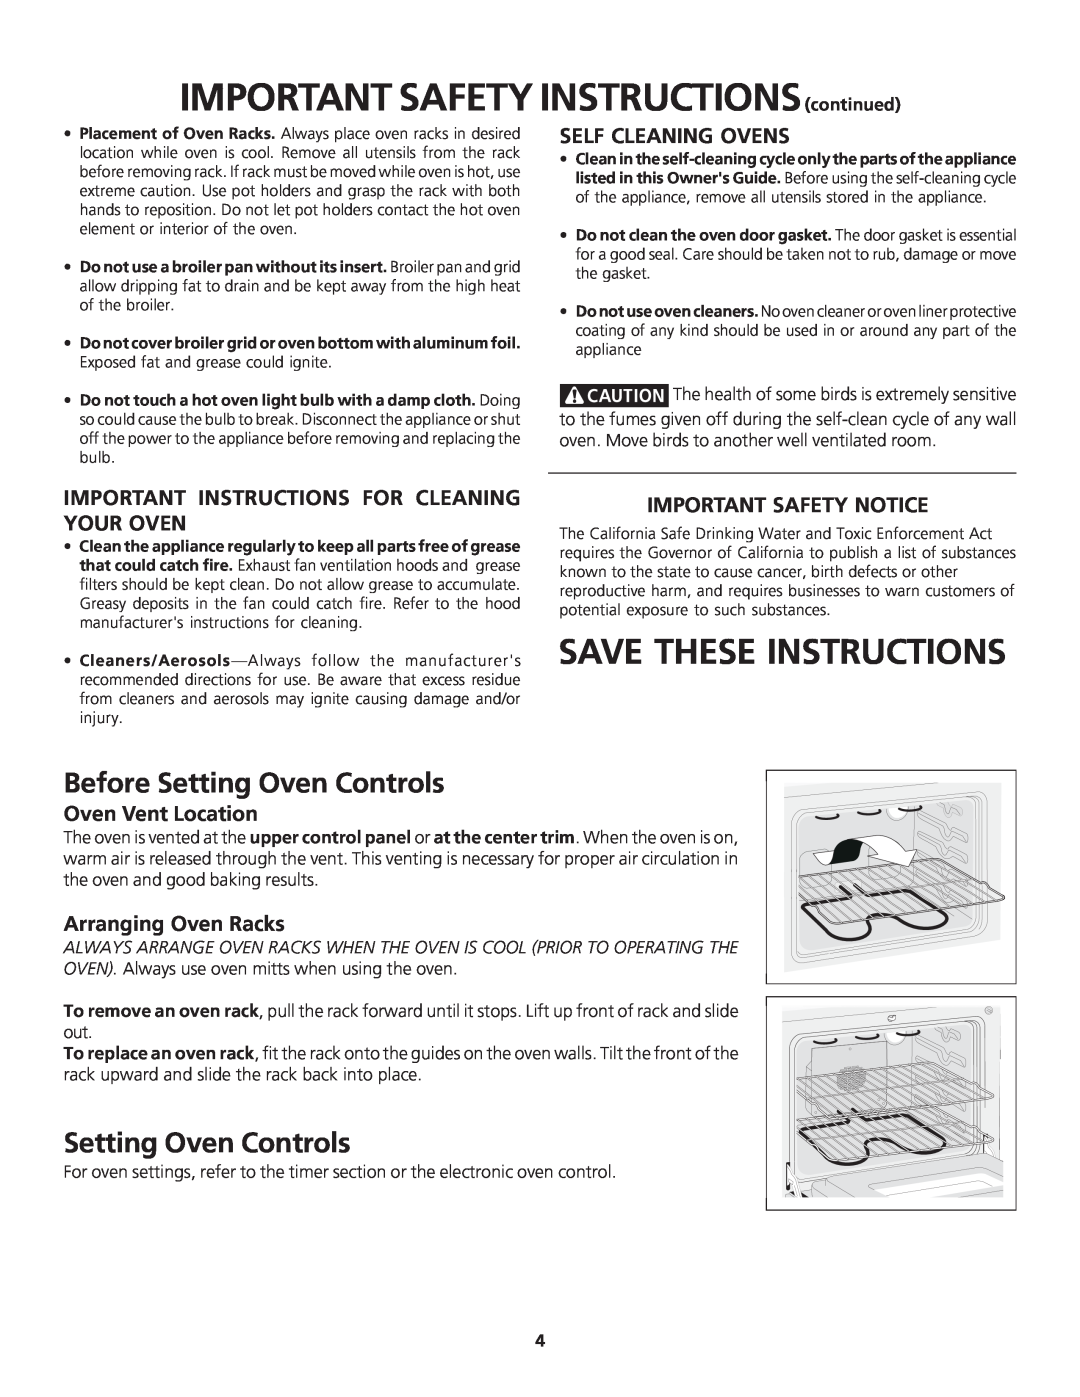 Frigidaire 0703, FEB24S2AS IMPORTANT SAFETY INSTRUCTIONScontinued, Before Setting Oven Controls, Self Cleaning Ovens 